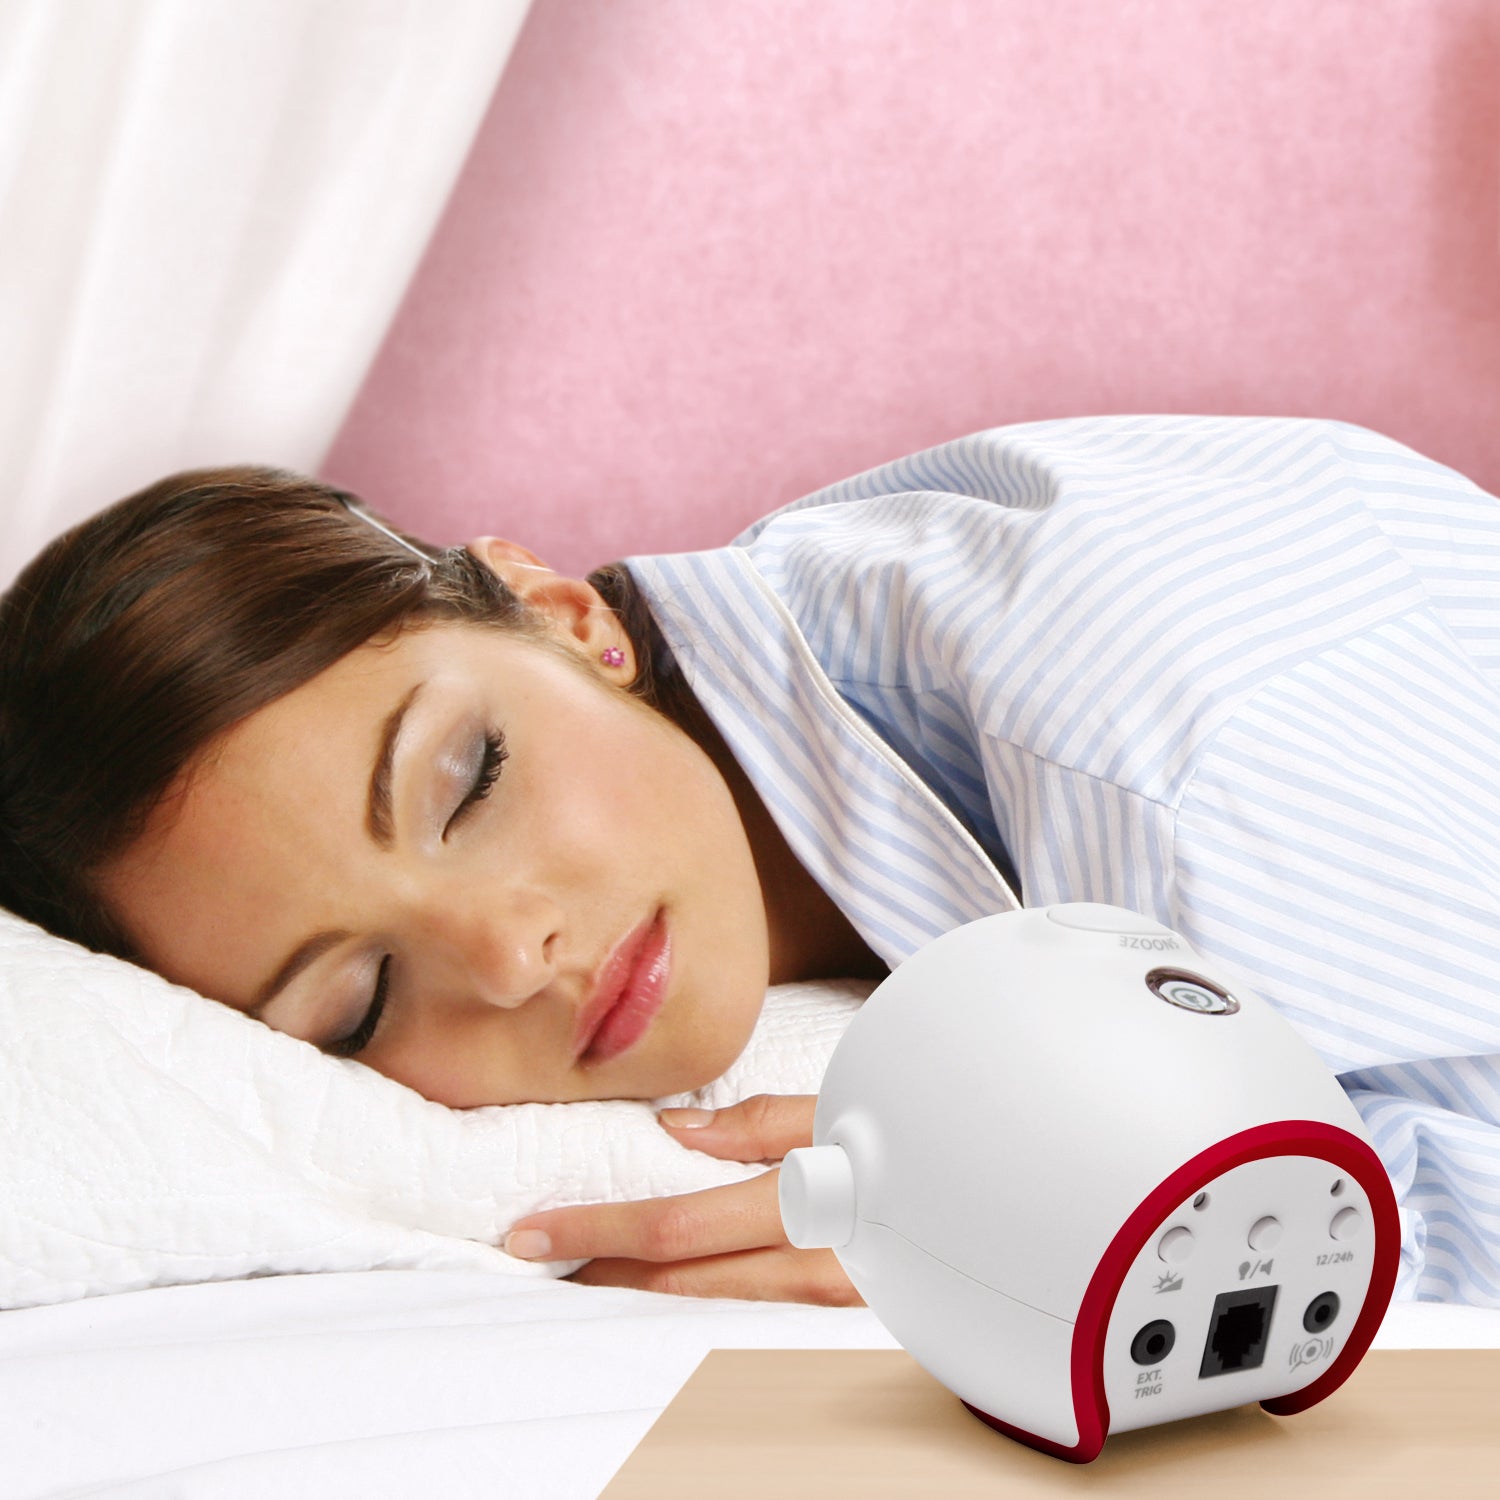 Smoke/Fire and Carbon Monoxide Alarm Notification System | with Alarm Clock Receiver and Bed Shaker